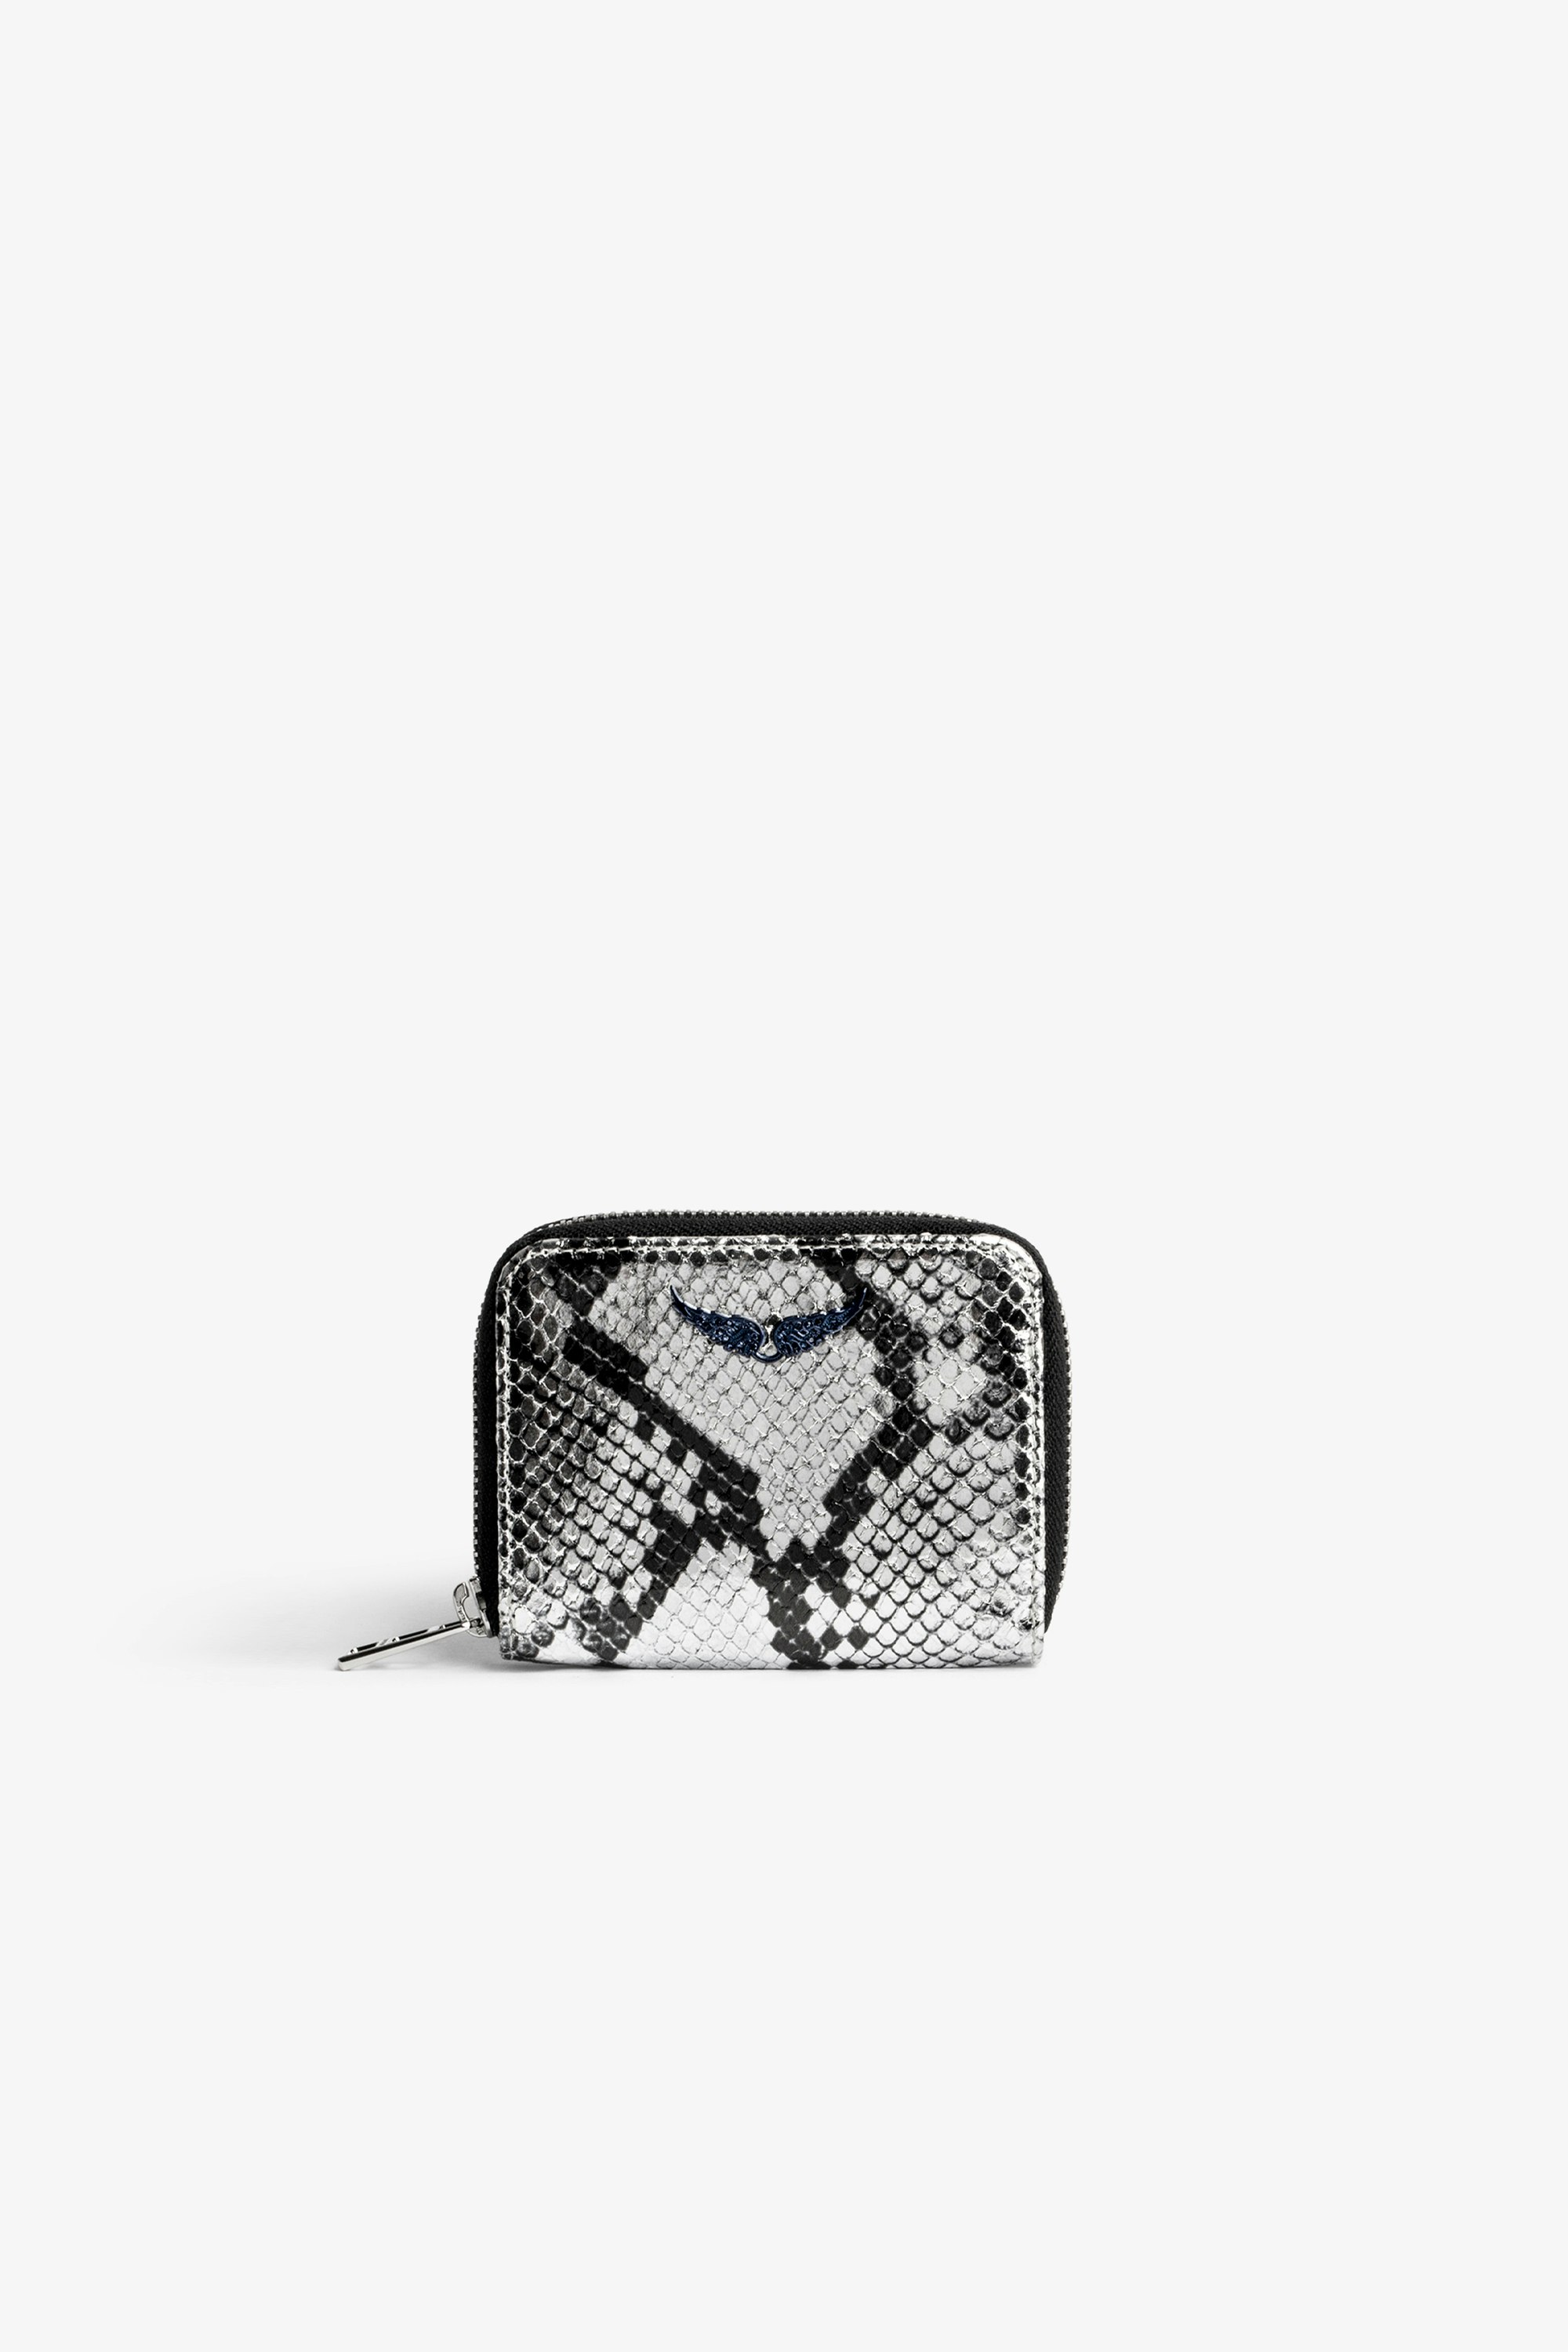 Mini ZV Coin 財布 Women’s silver metallic snake-embossed leather zipped coin purse with crystal-embellished wings charm